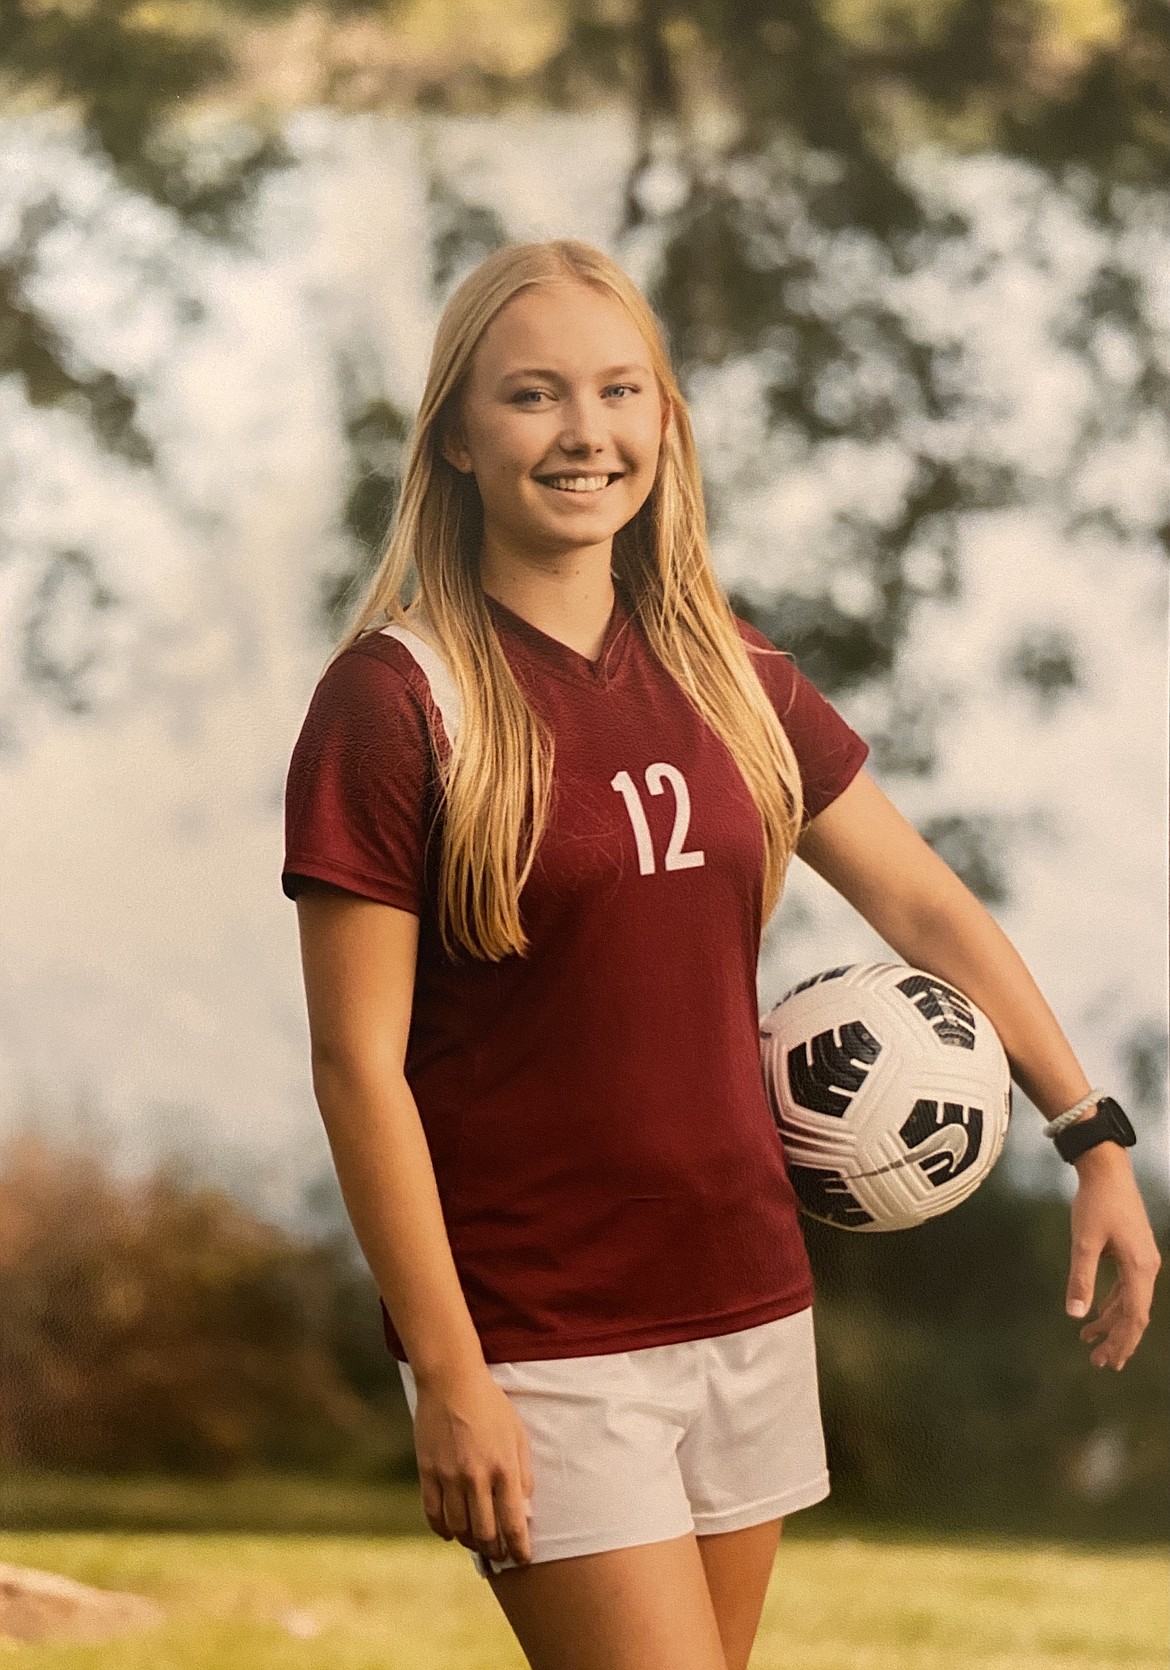 Elén Lovas as a member of the MLHS Chiefs girls soccer team. She said one thing she liked about her time in the U.S. is how youth athletics is organized when compared to her homeland.